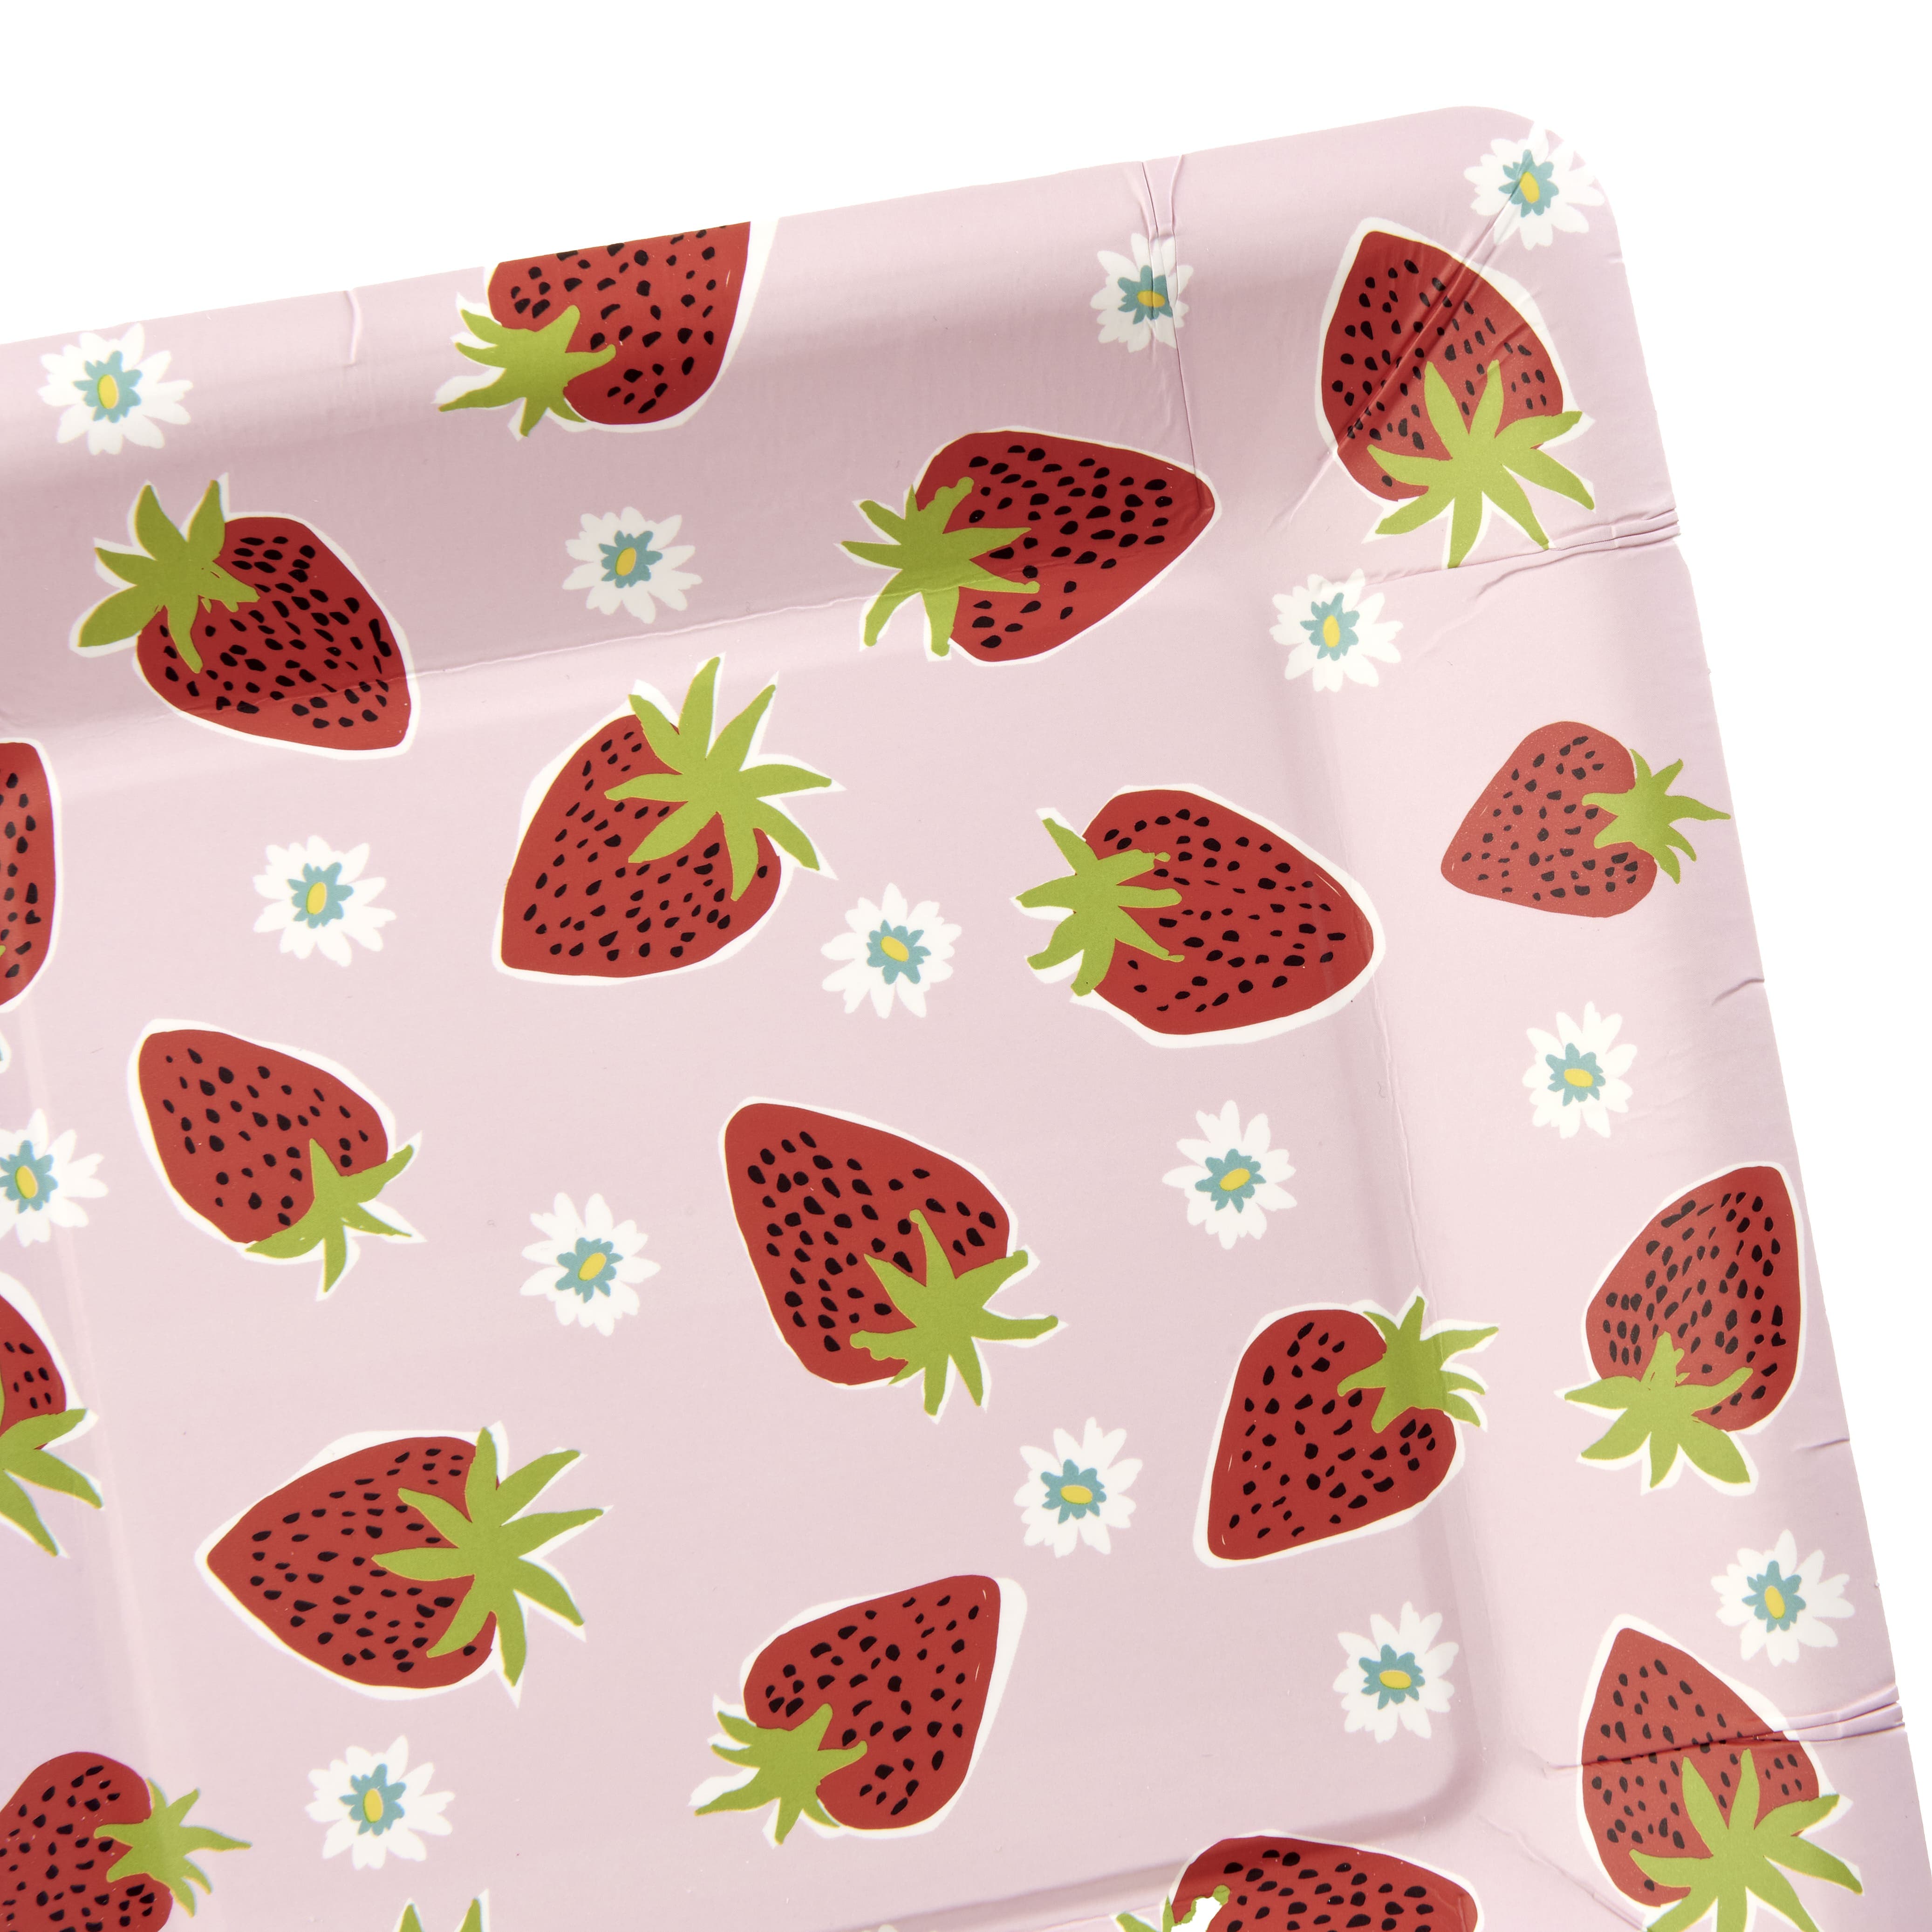 Strawberry Plate - 16 Count